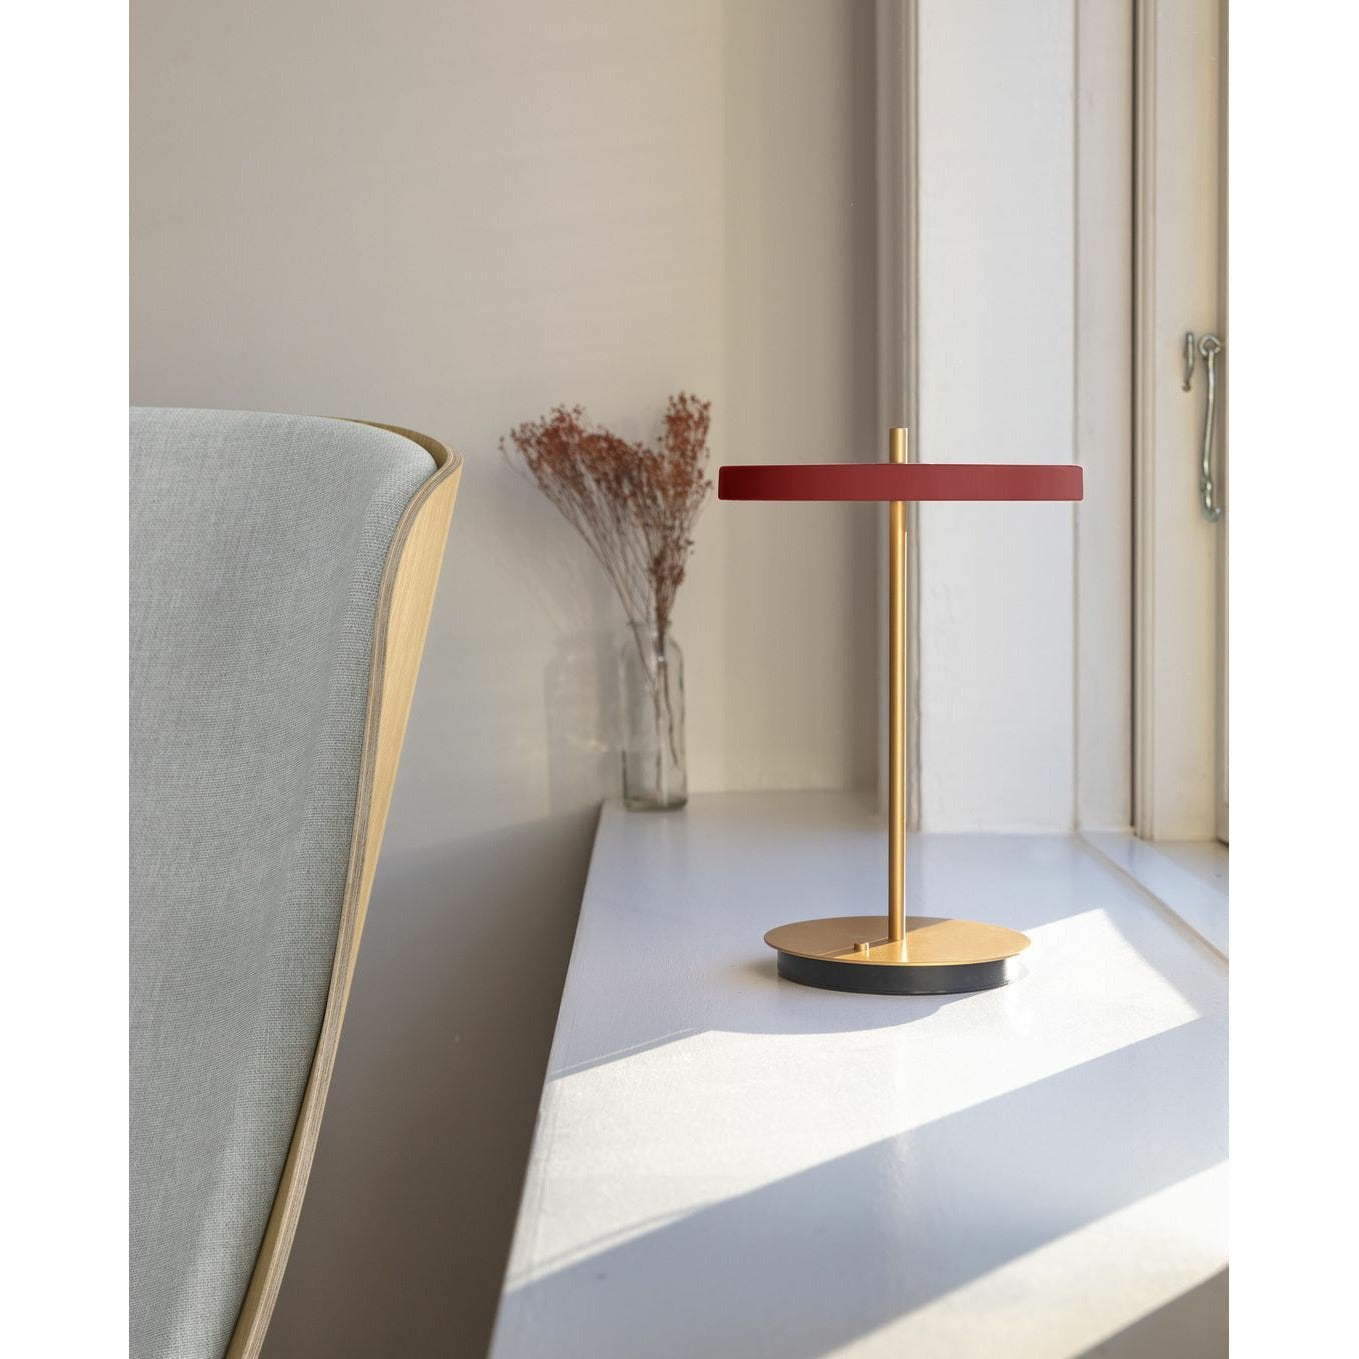 UMAGE Asteria Moving Table Lamp, Ruby Red V2